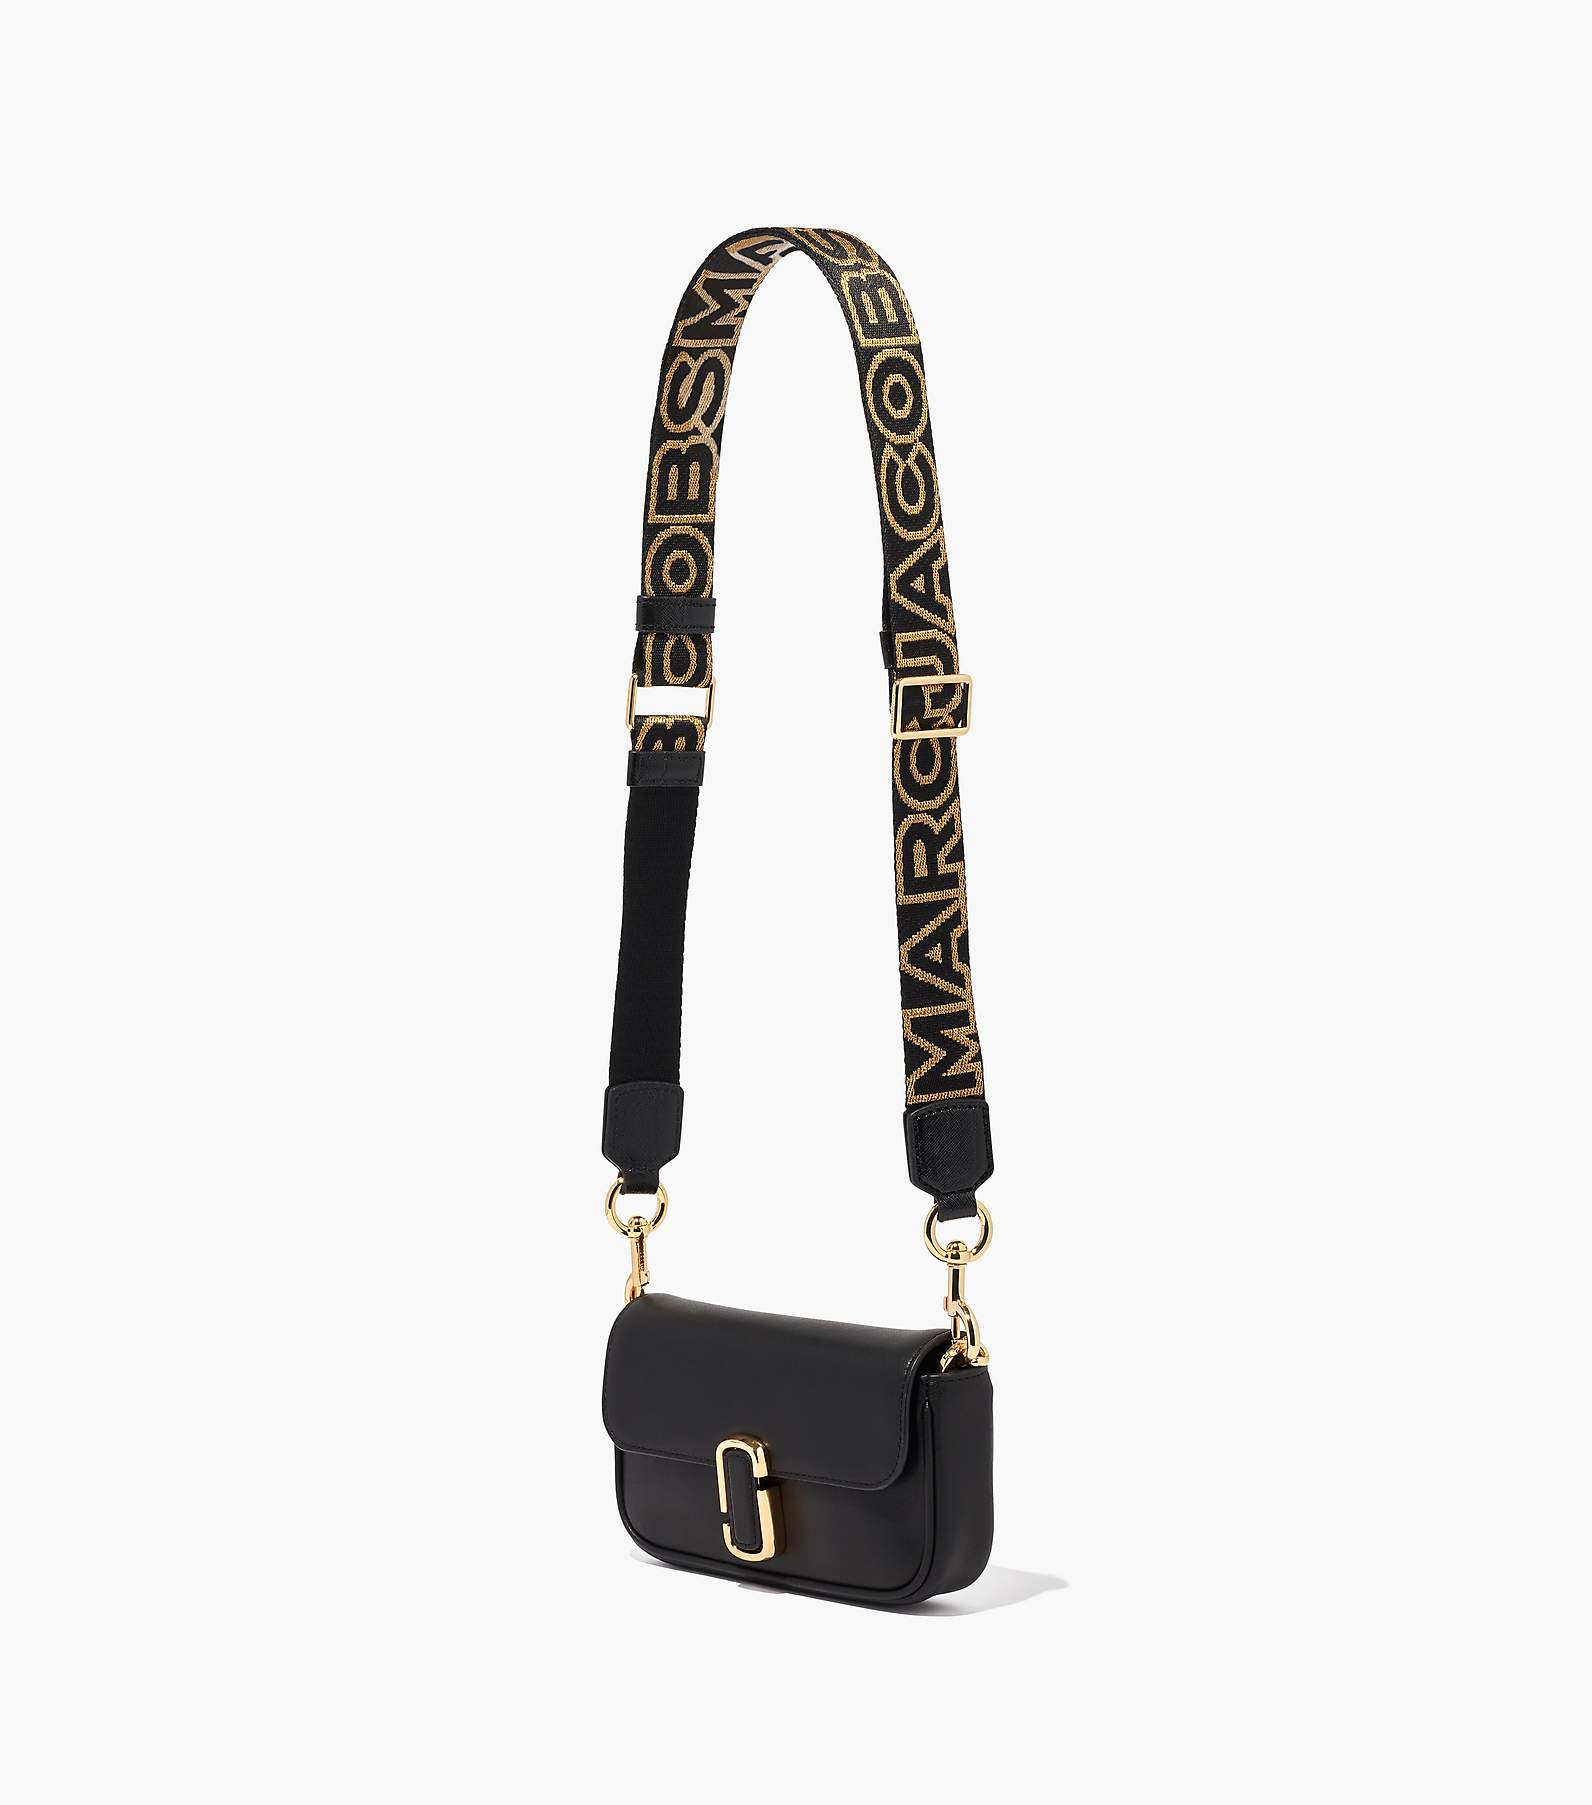 Marc Jacobs The Thin Strap Black/White One Size